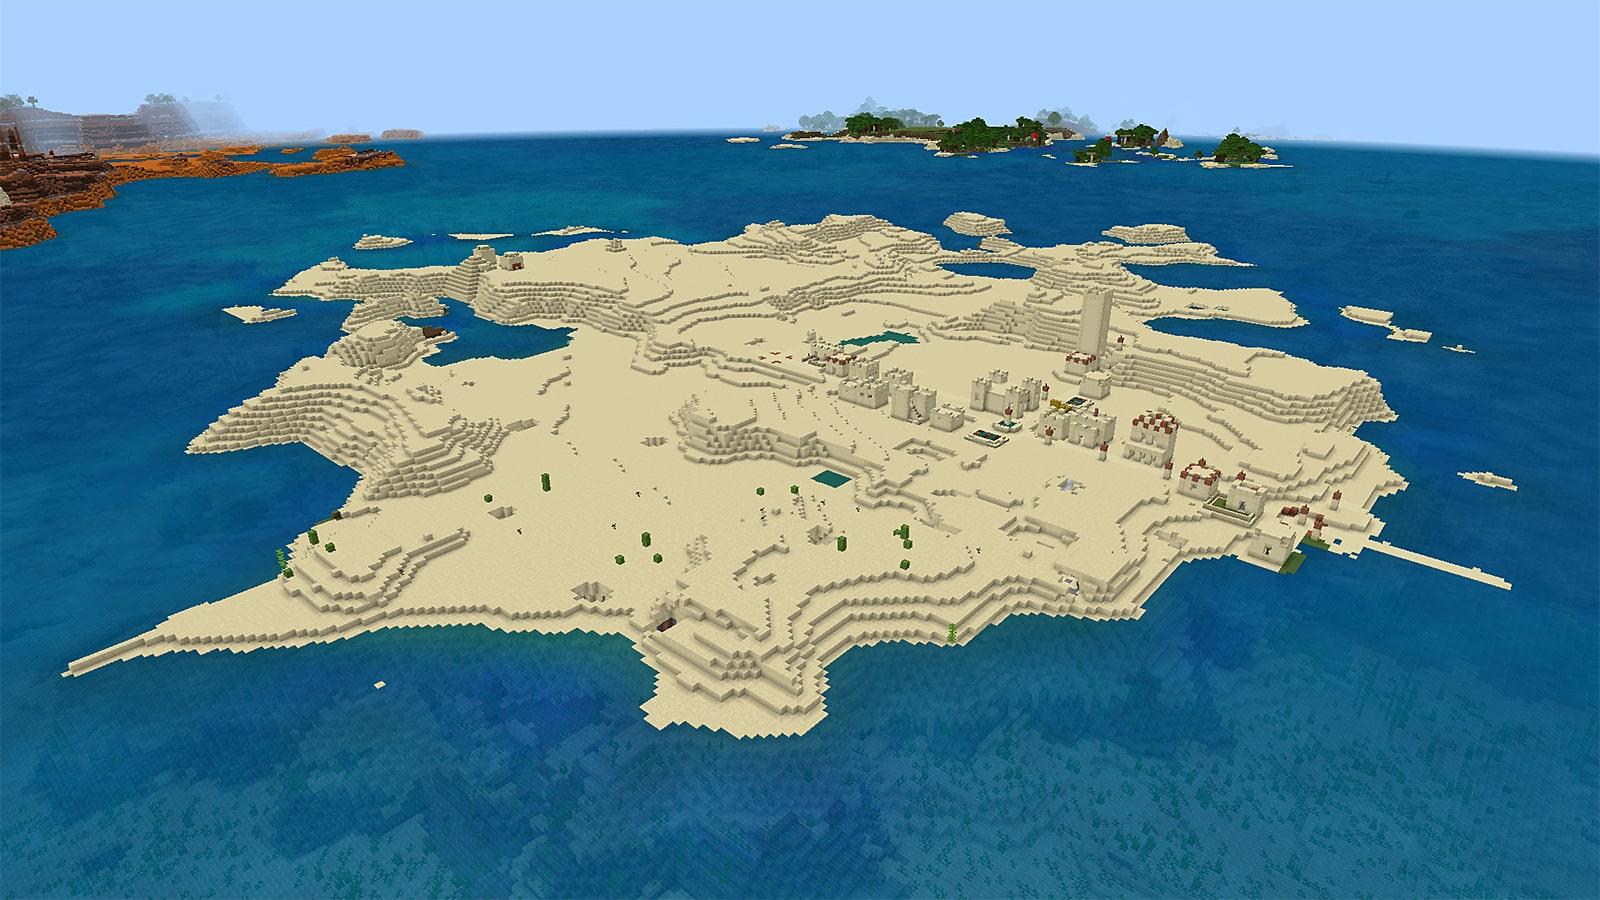 A Desert Island map created using a seed in Minecraft